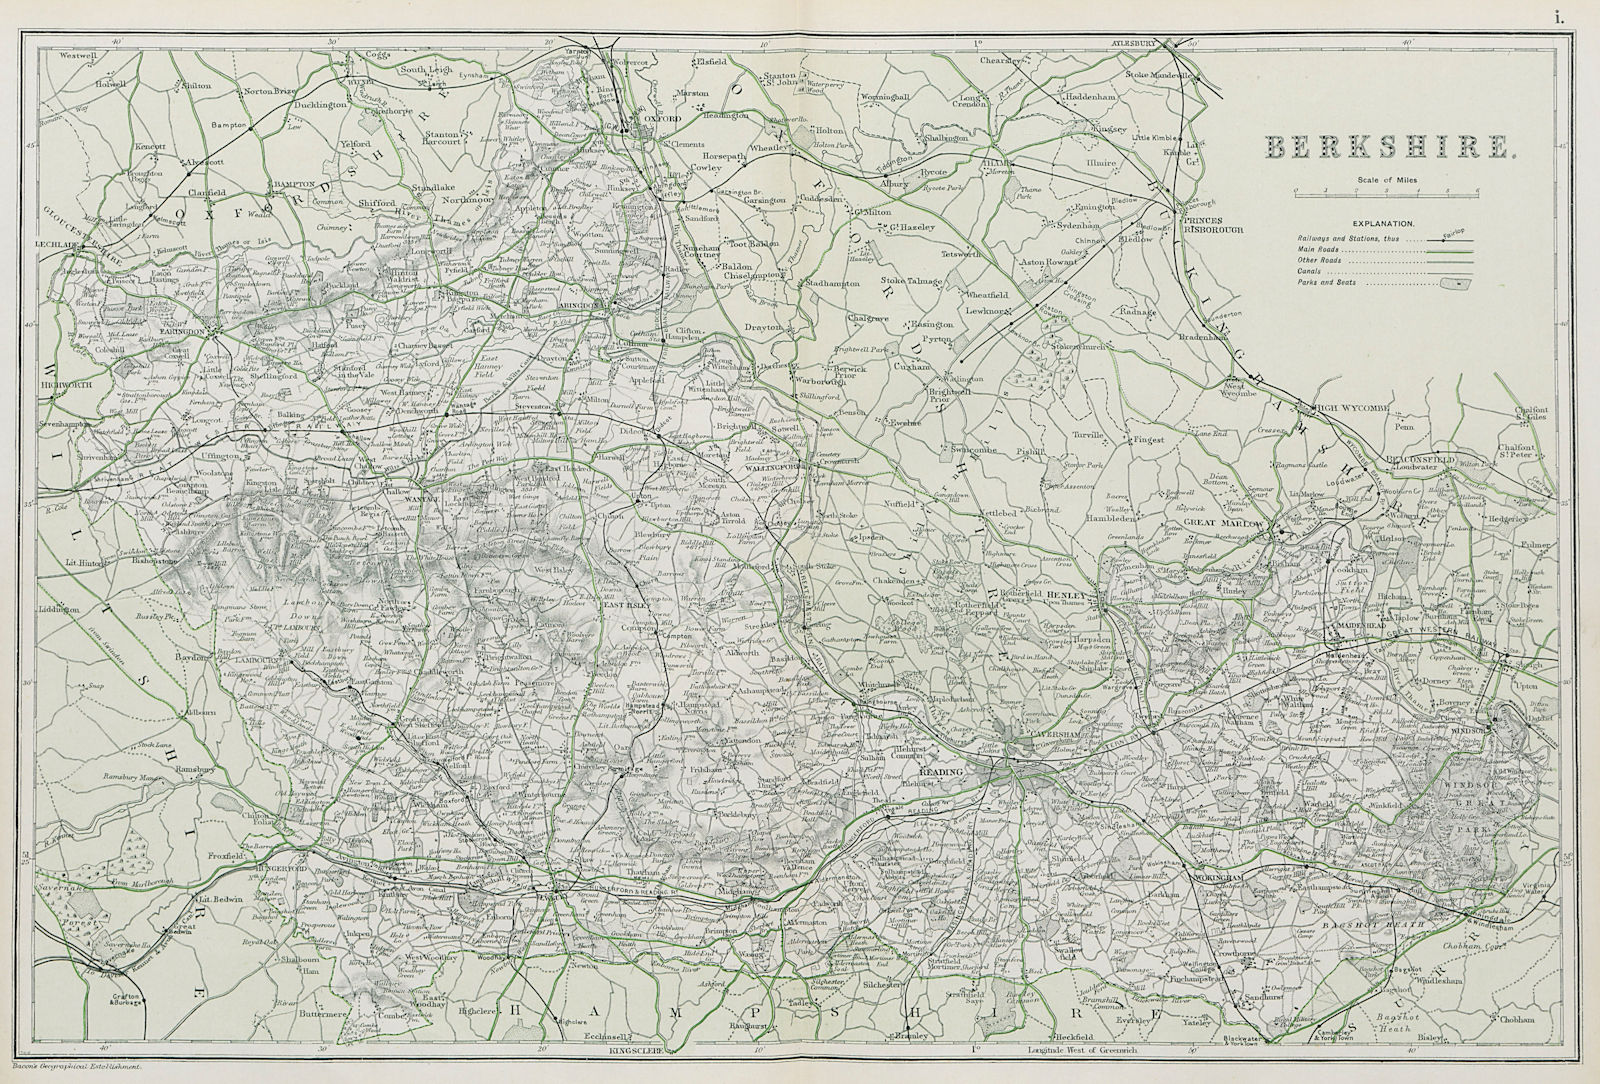 Associate Product BERKSHIRE. Showing Parliamentary divisions, boroughs & parks. BACON 1913 map